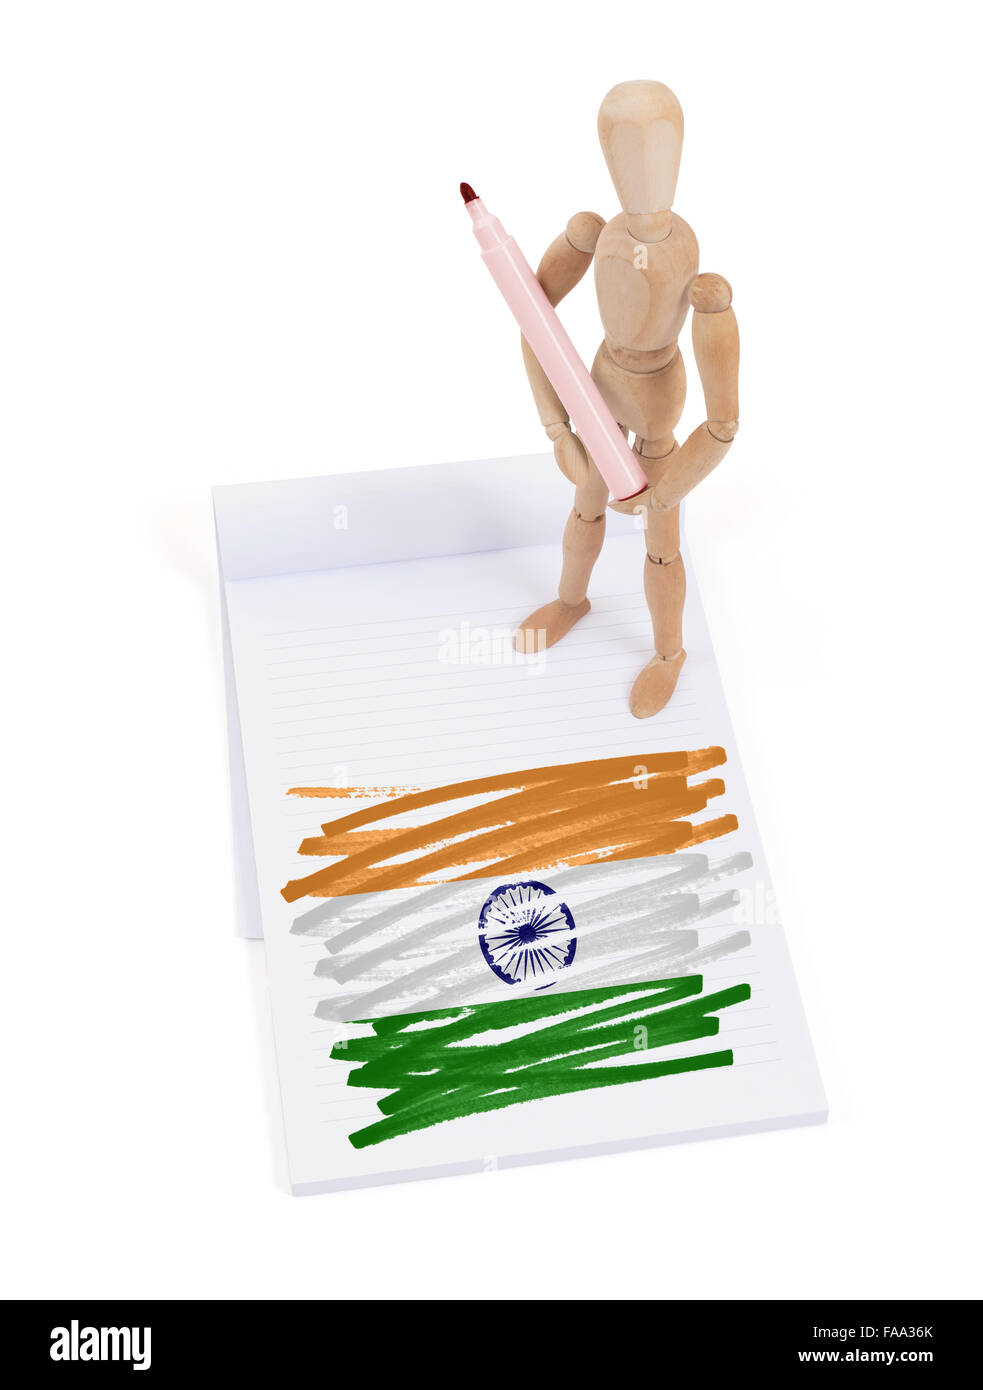 Wooden mannequin made a drawing of a flag - India Stock Photo